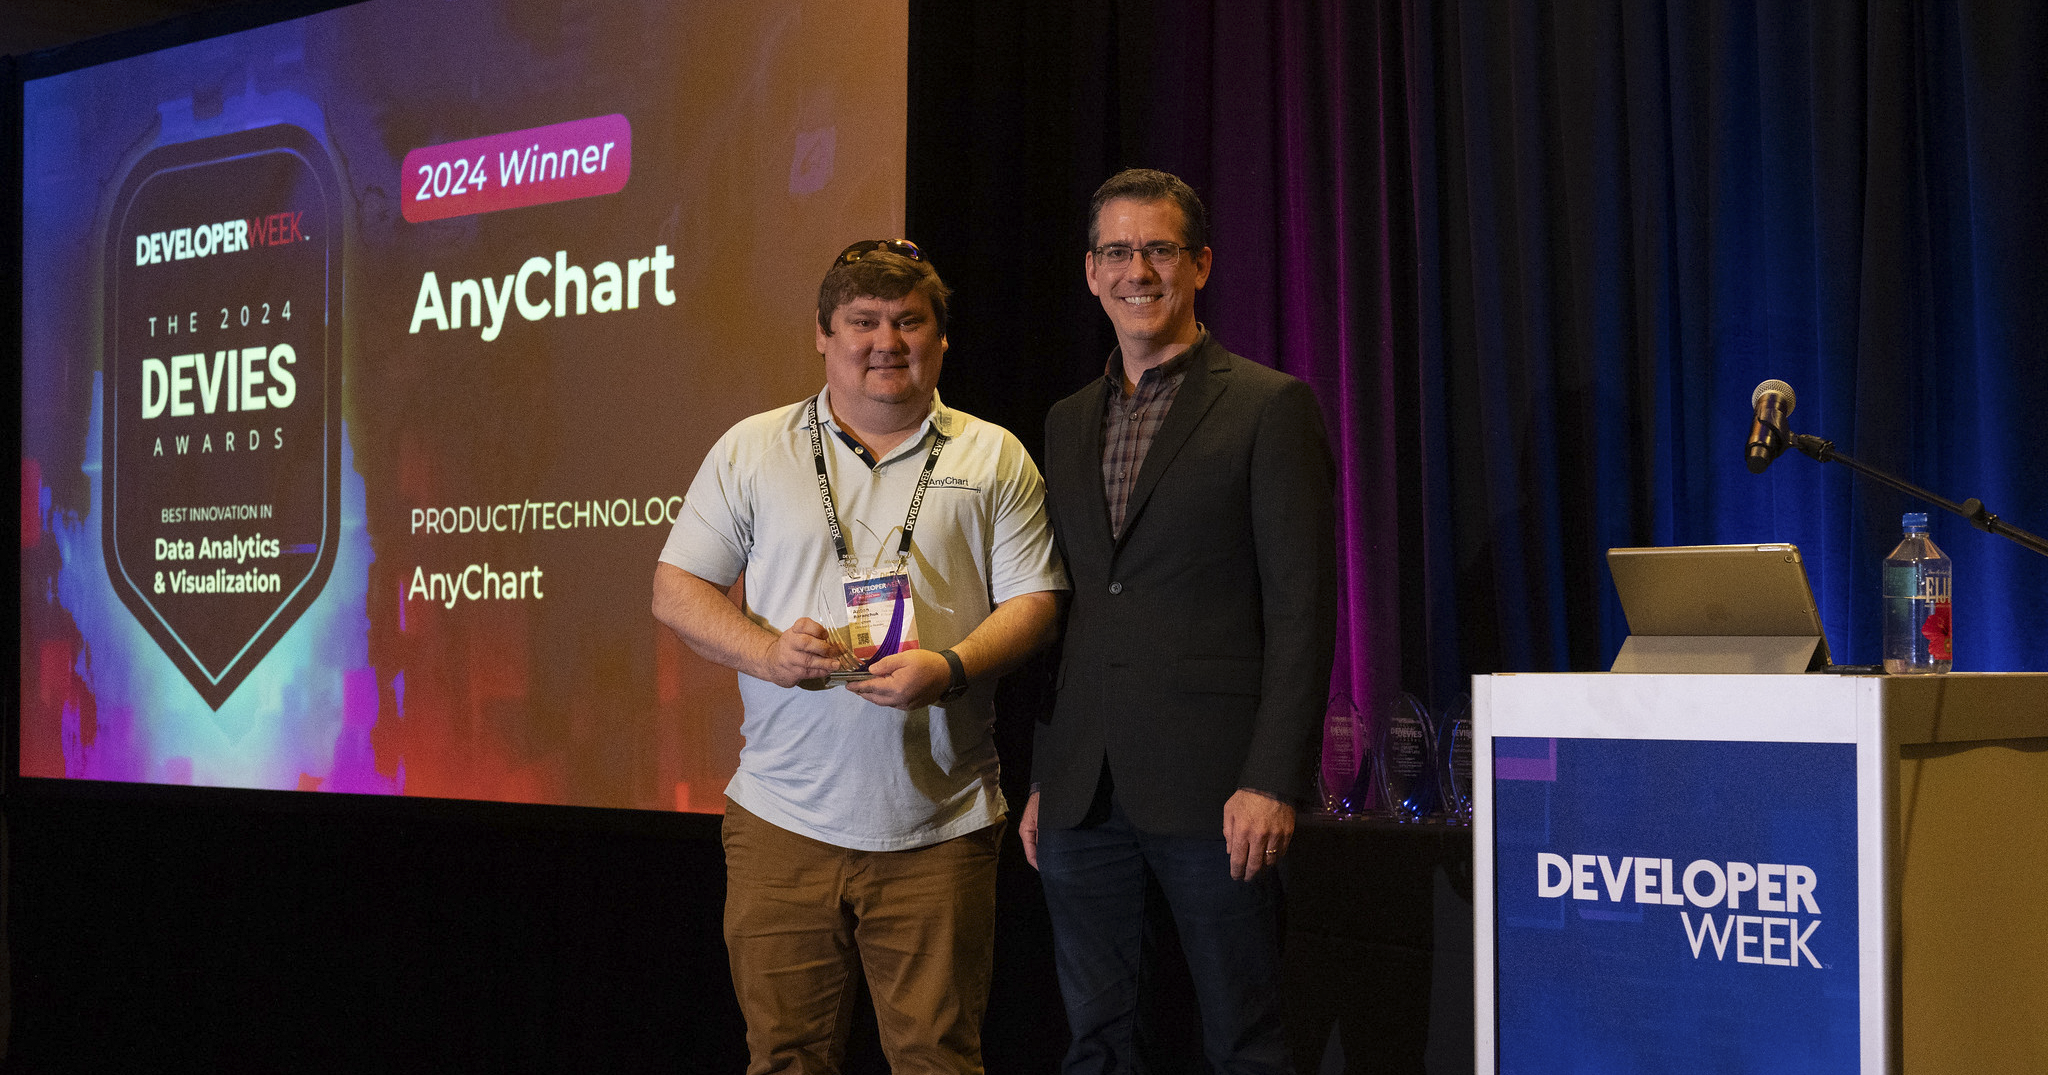 Anton Baranchuk, CEO and co-founder of AnyChart, receives the award from Jonathan Pasky, Executive Producer of DevNetwork, producer of DeveloperWeek and the 2024 DEVIES Awards